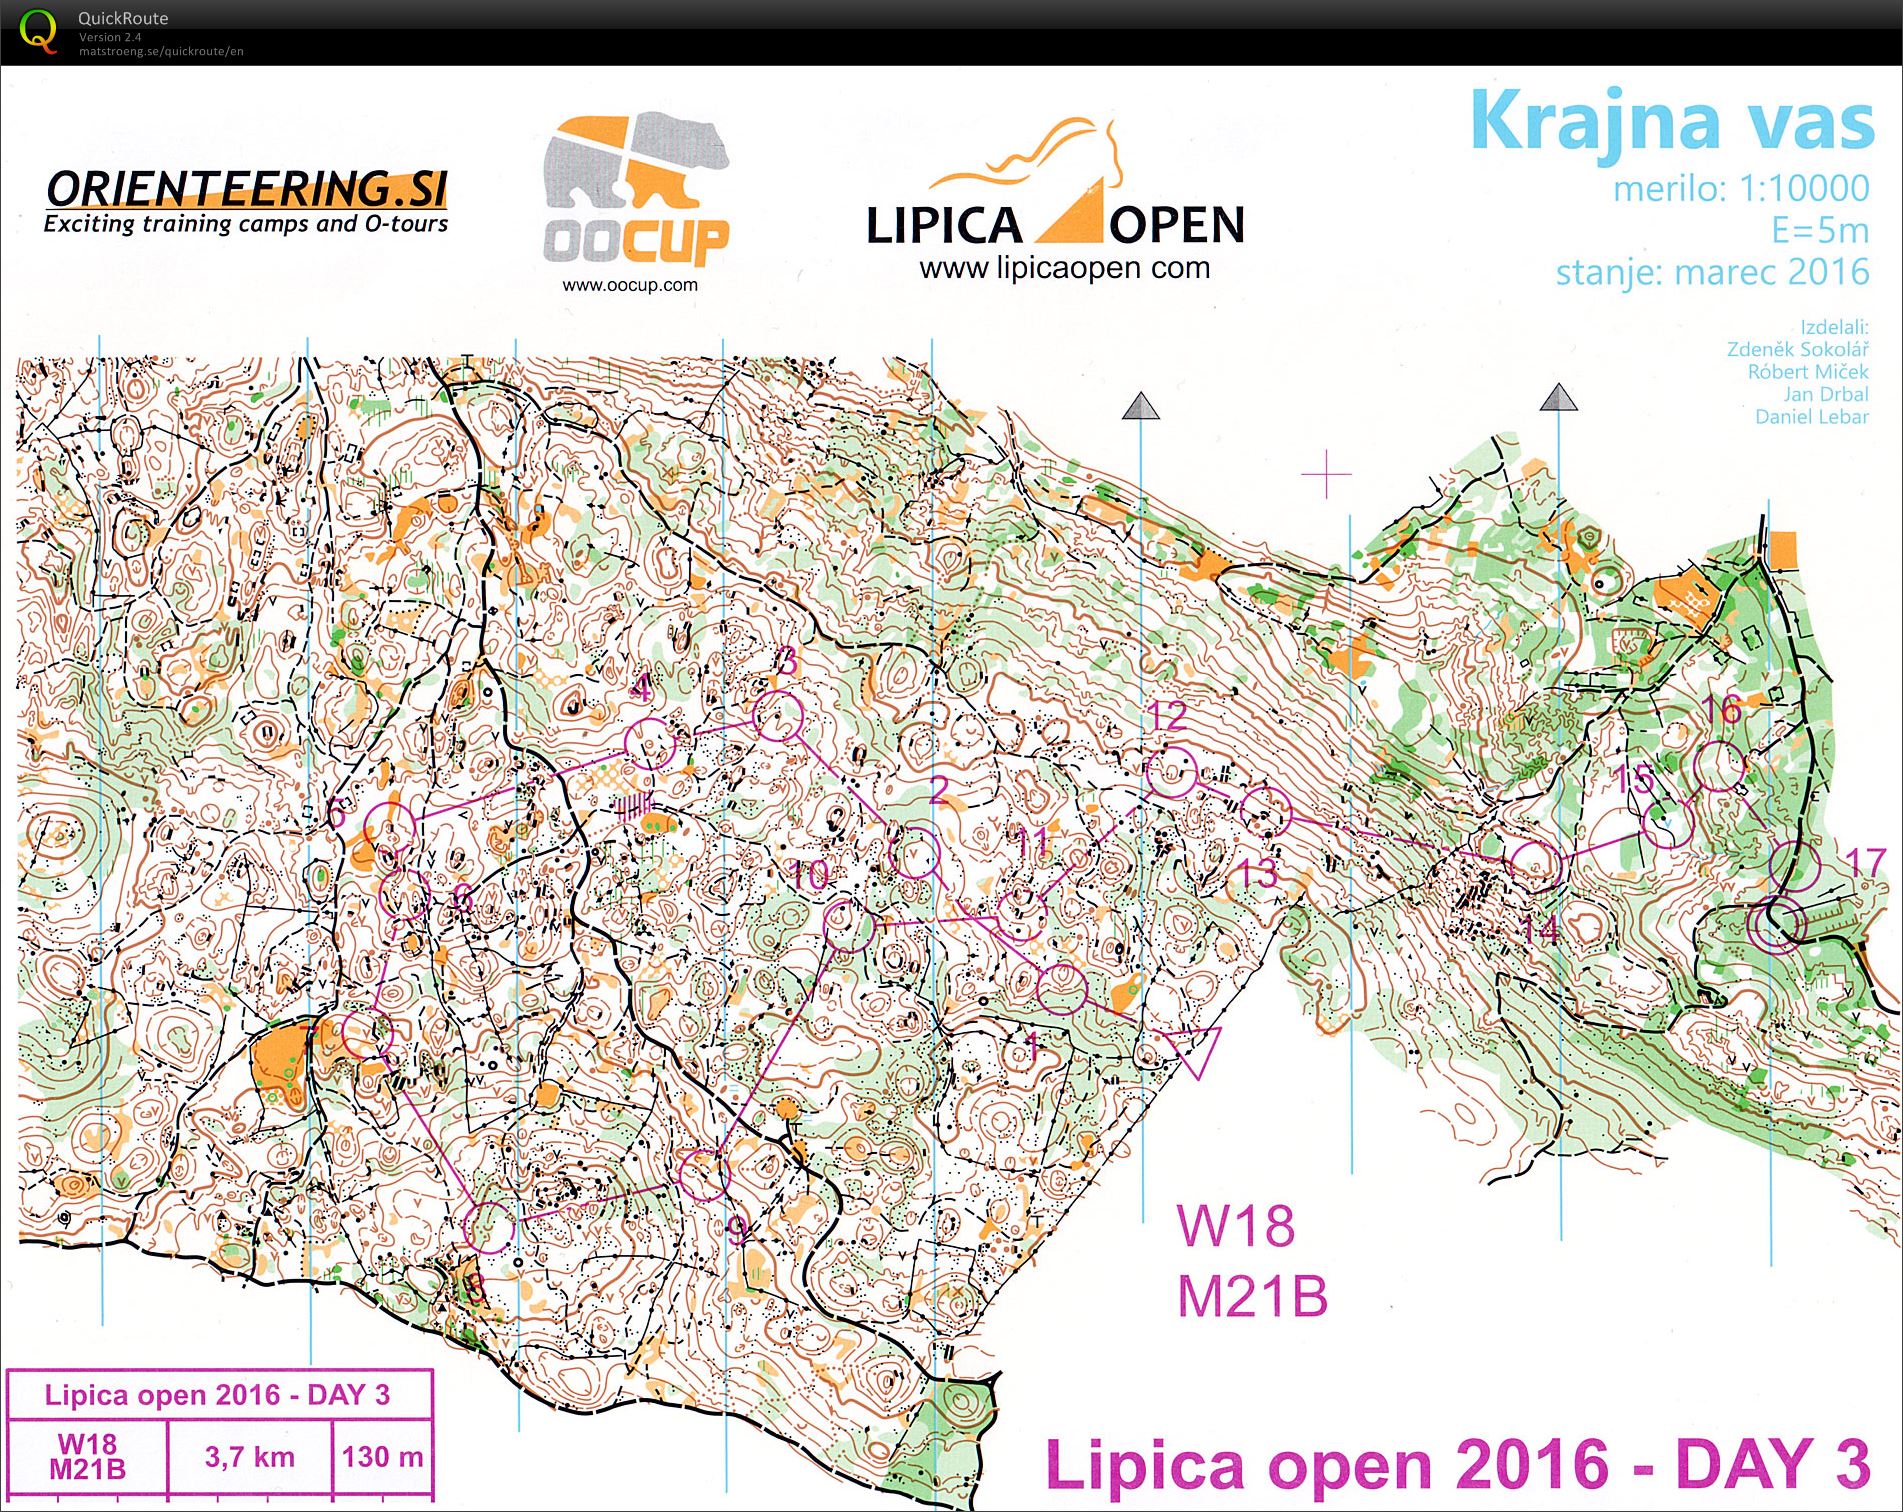 Lipica Open 2016 Day 3 (14-03-2016)